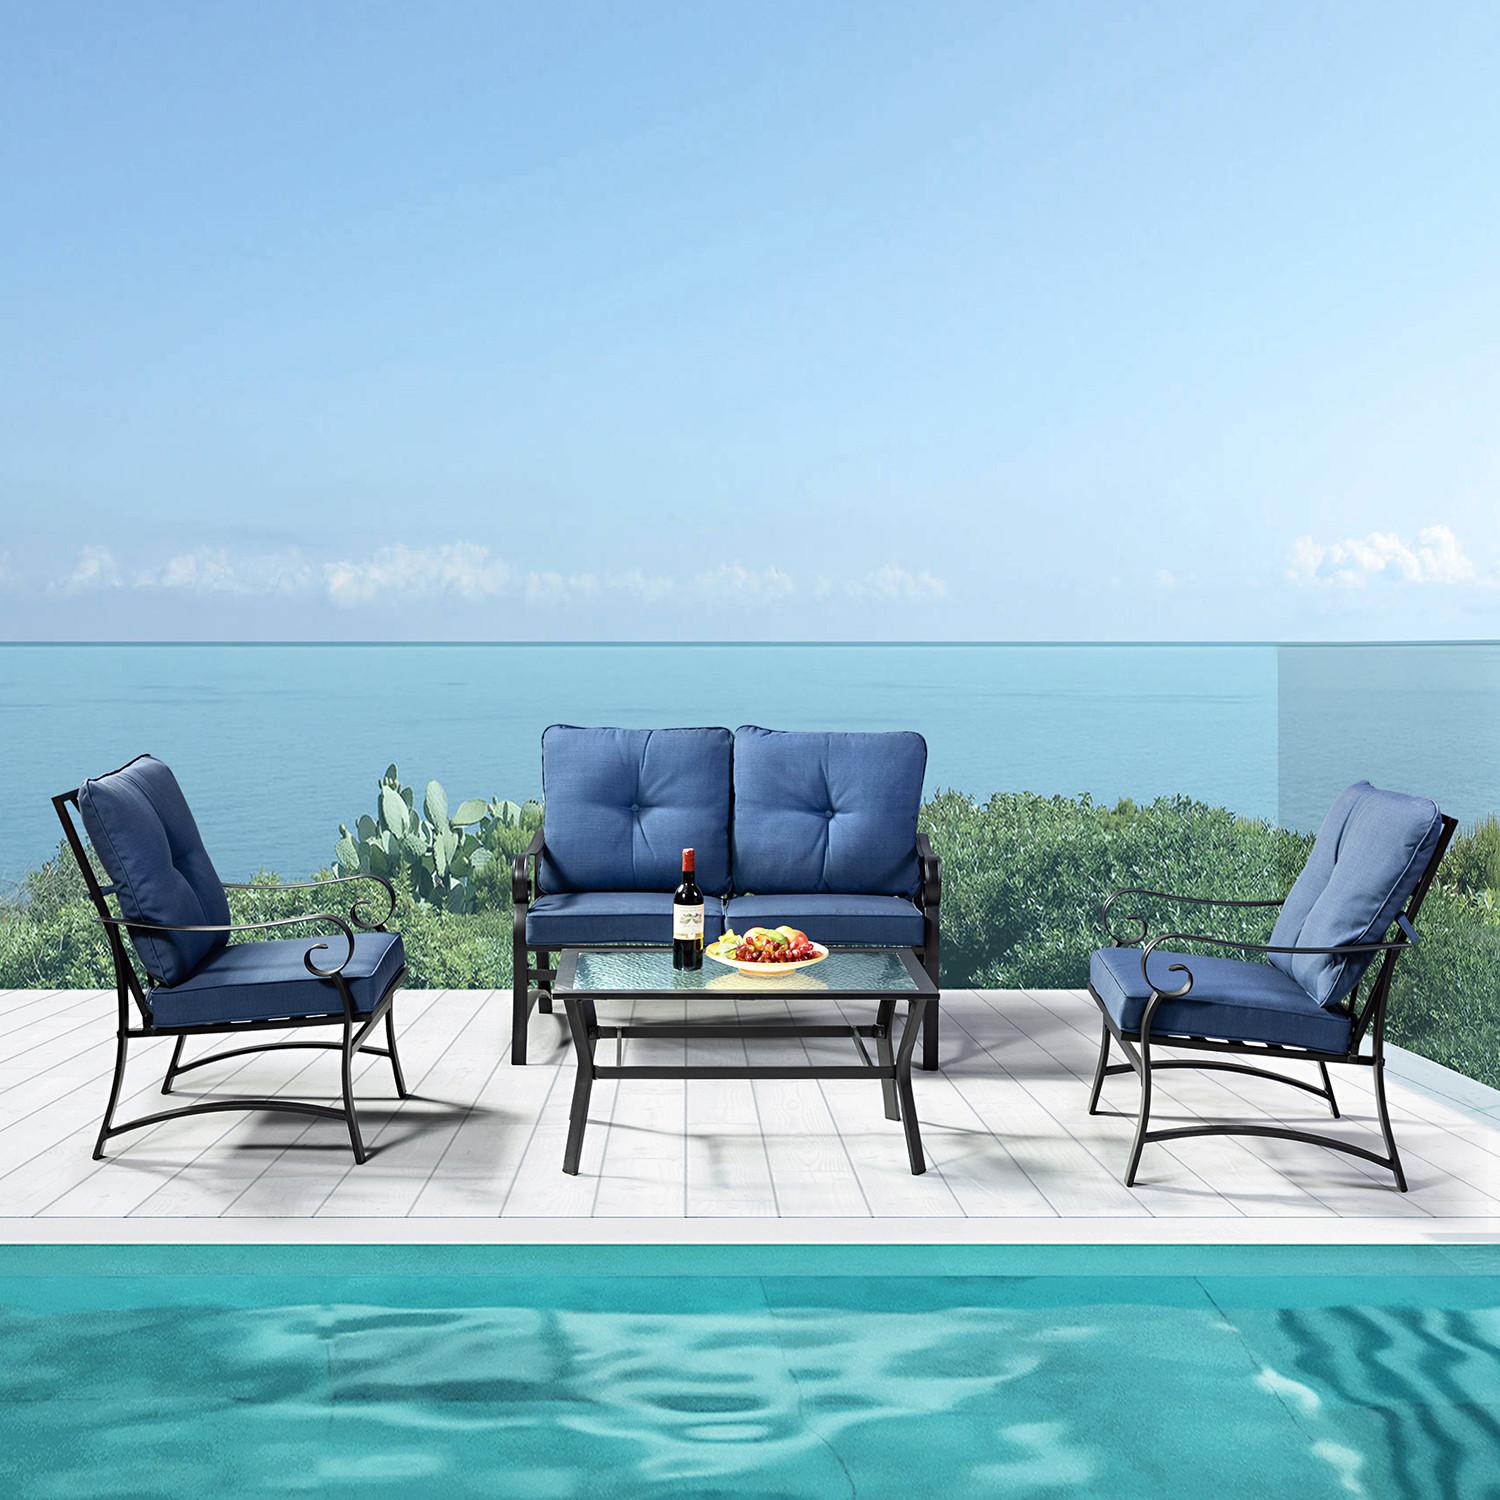 Iron Scroll Slate Blue Outdoor Sofa Seating and Table Set